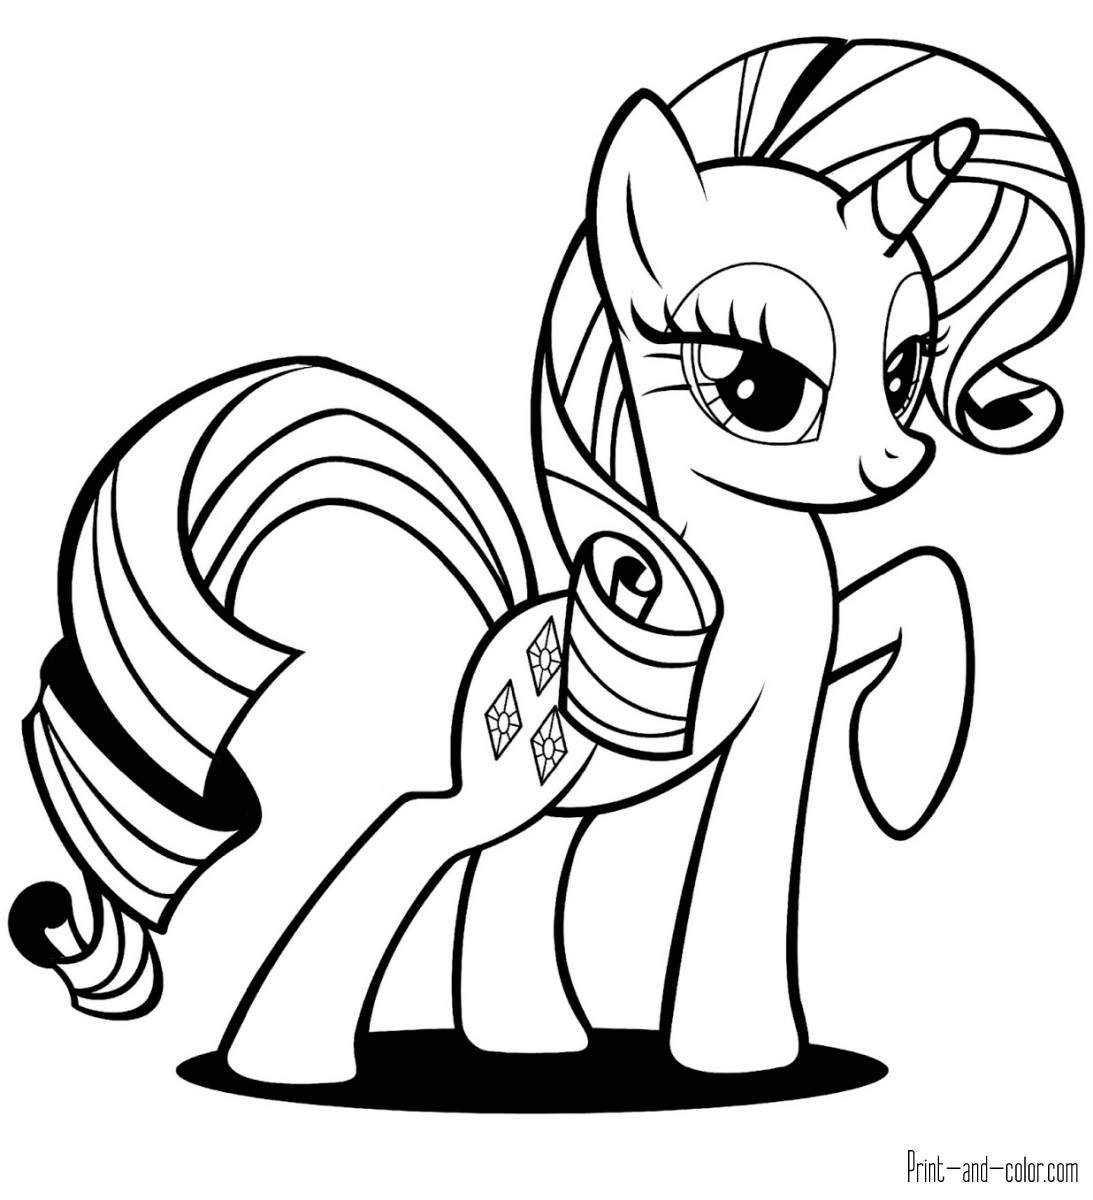 Kids Coloring Pages My Little Pony
 My Little Pony coloring pages